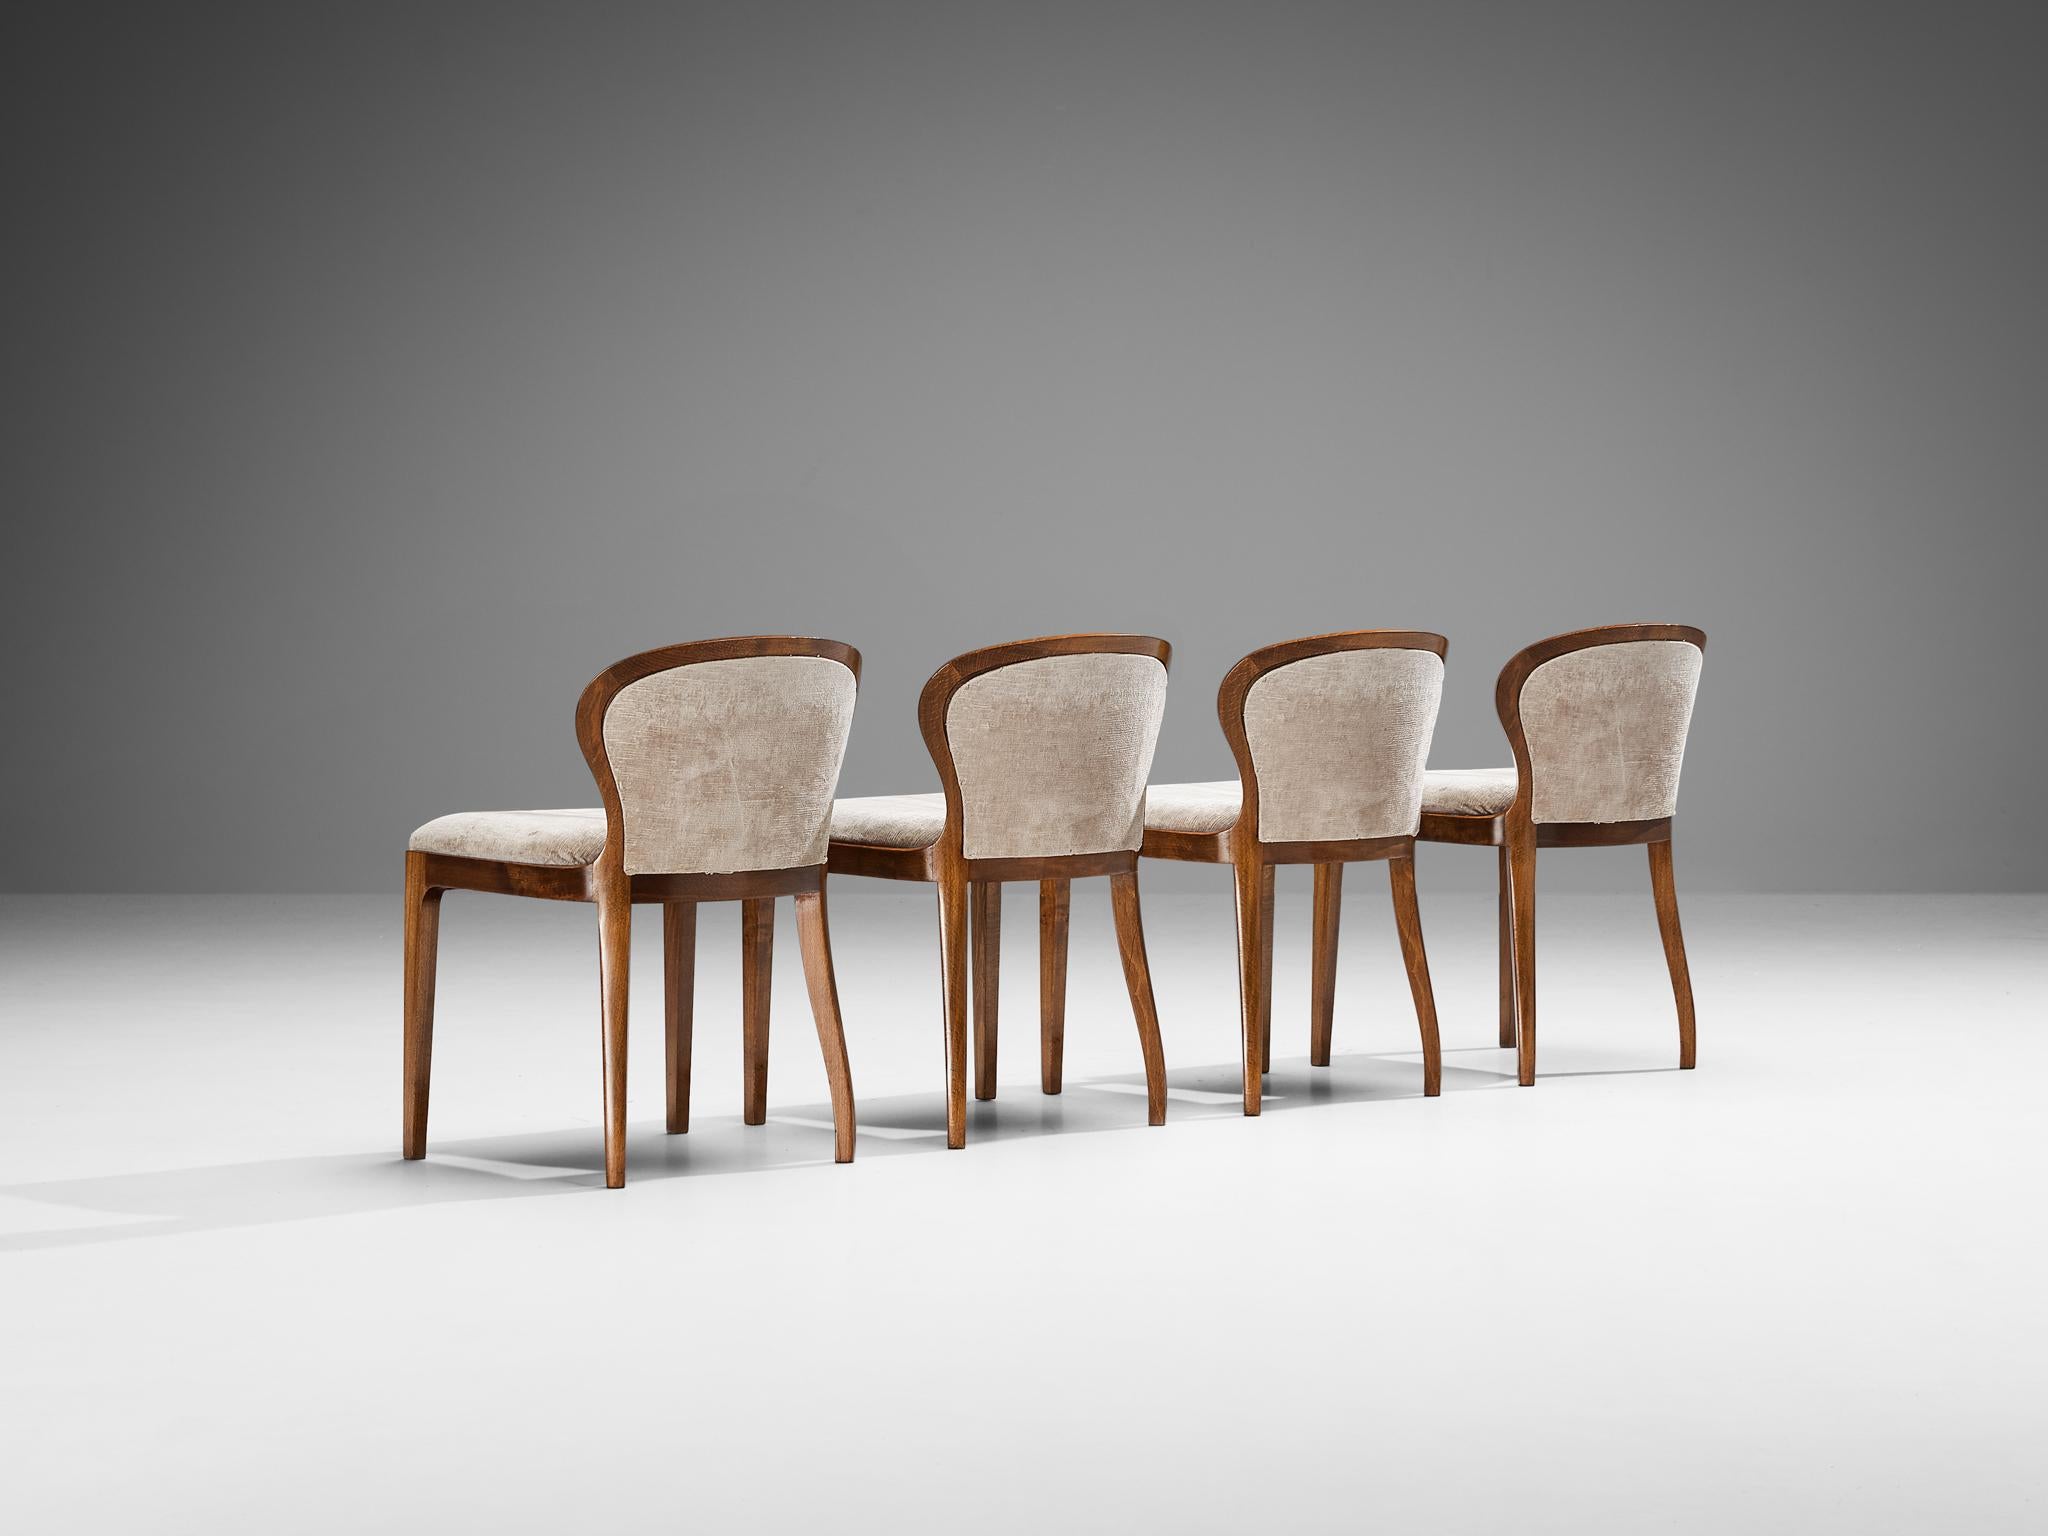 Lorenzo Forges Davanzati for Elam, set of four 'Stradivarius' dining chairs, velvet, beech, Italy, 1960s

These chairs are designed by Lorenzo Forges Davanzati for Elam and are a quite rare find. The chairs are characterized by a backrest that